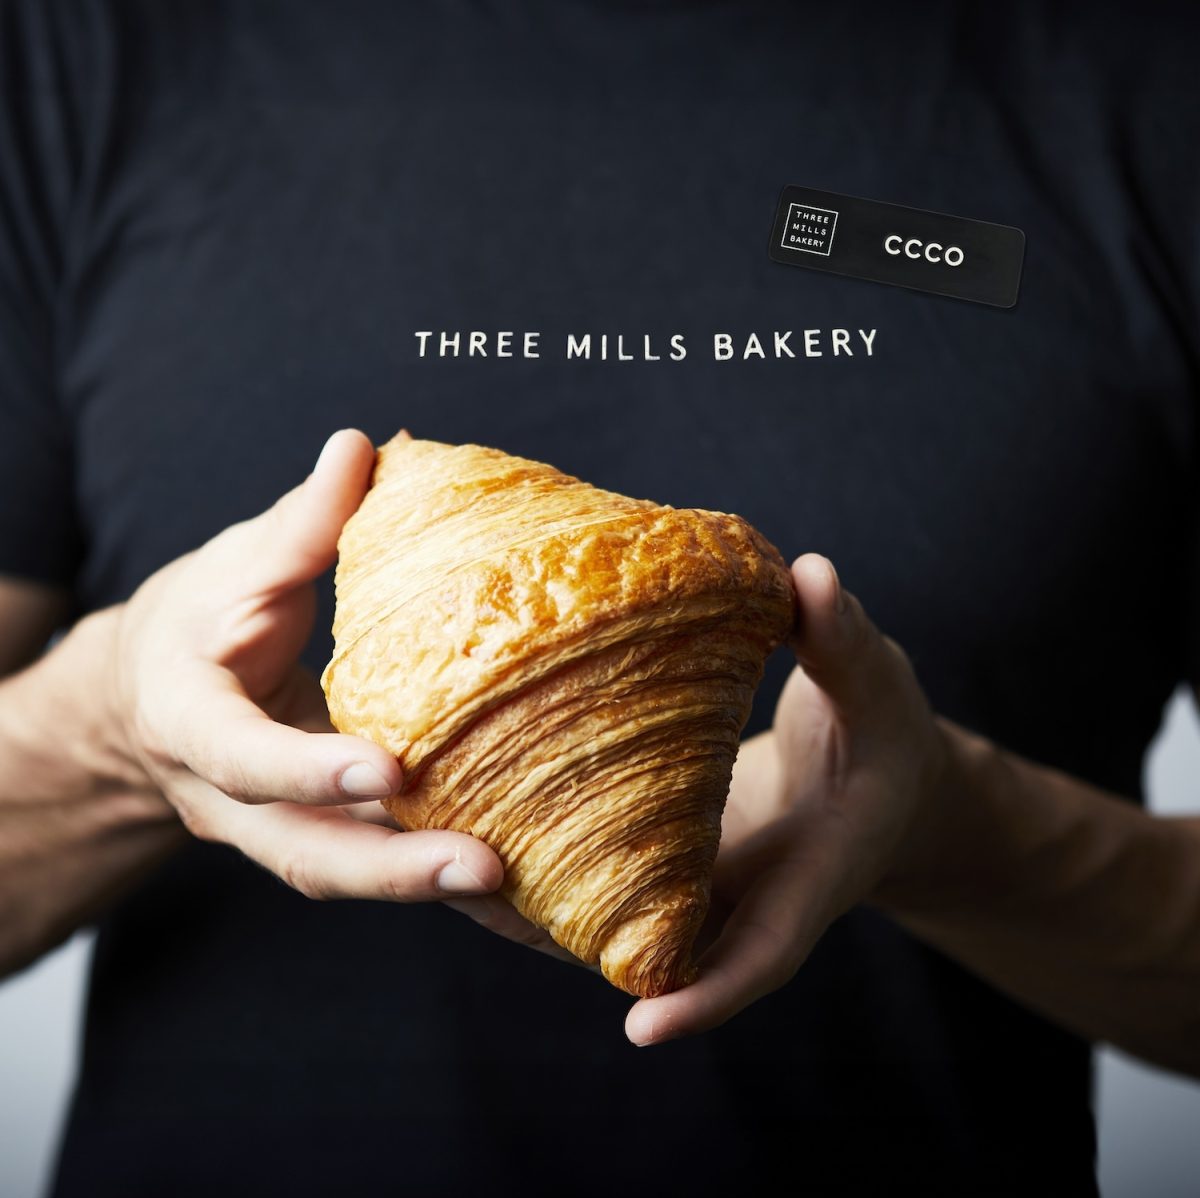 White hands hold a croissant in front of black shirt with white Three Mills Bakery text.